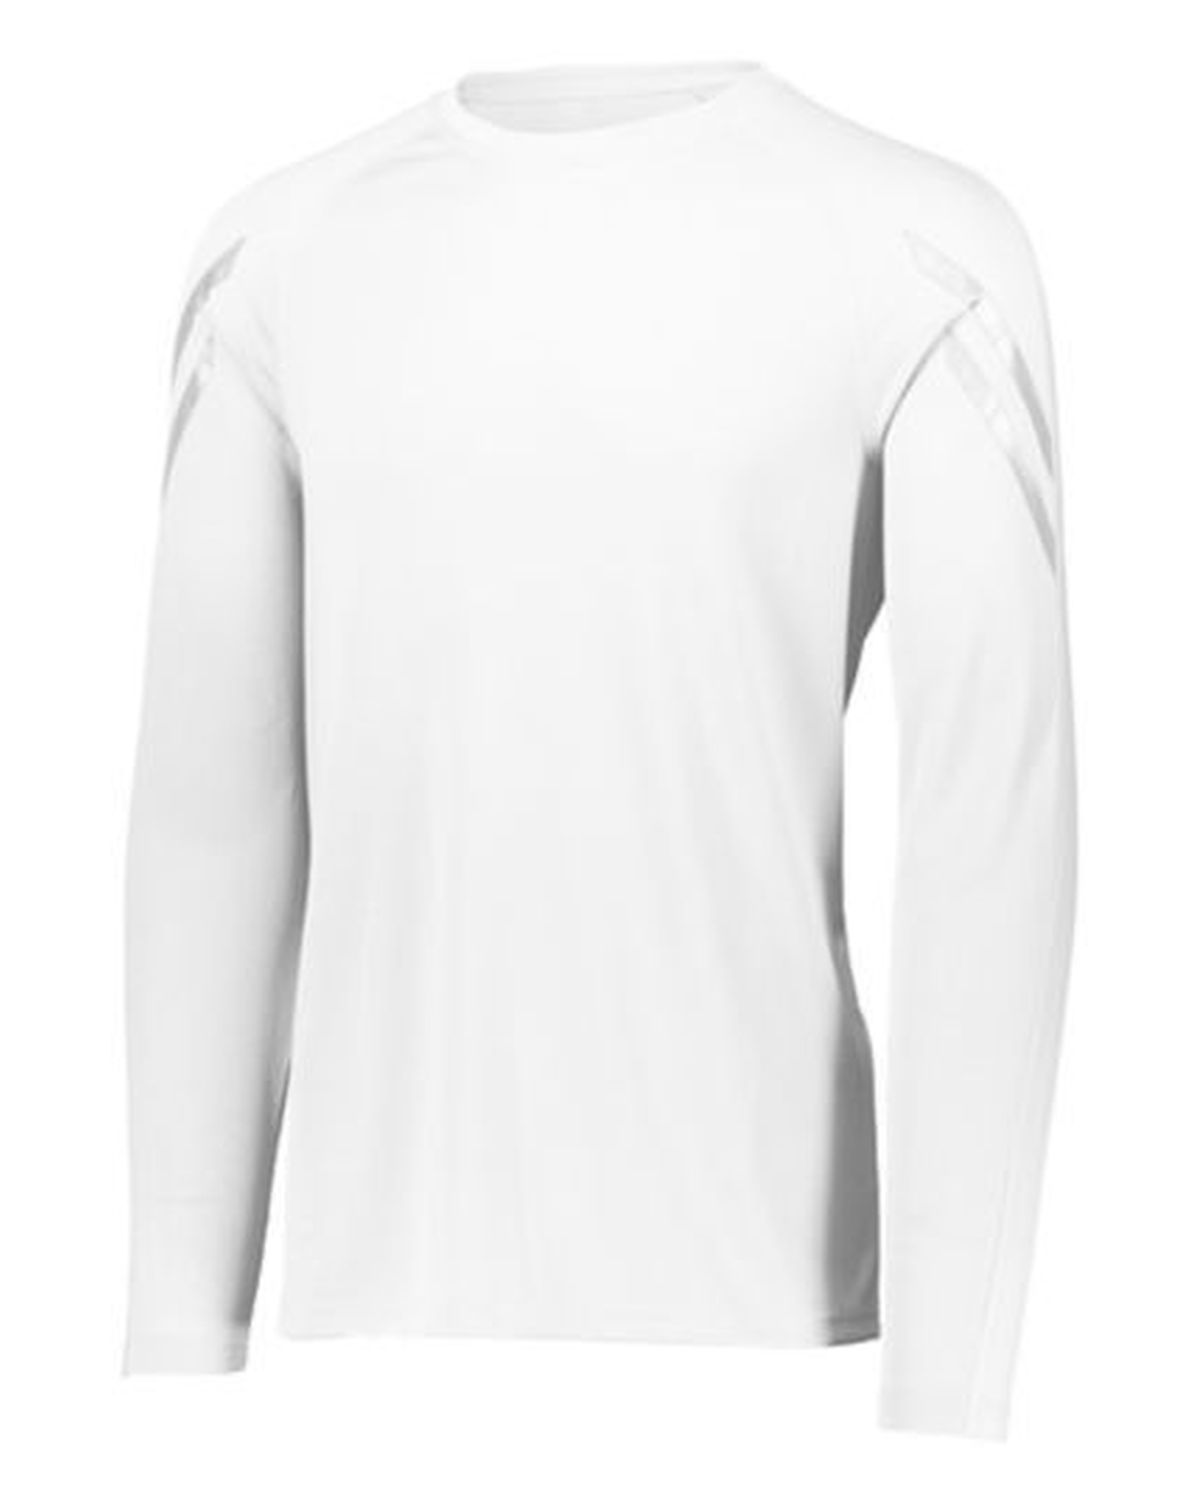 'Holloway 222607 Youth Flux Shirt Long Sleeve'